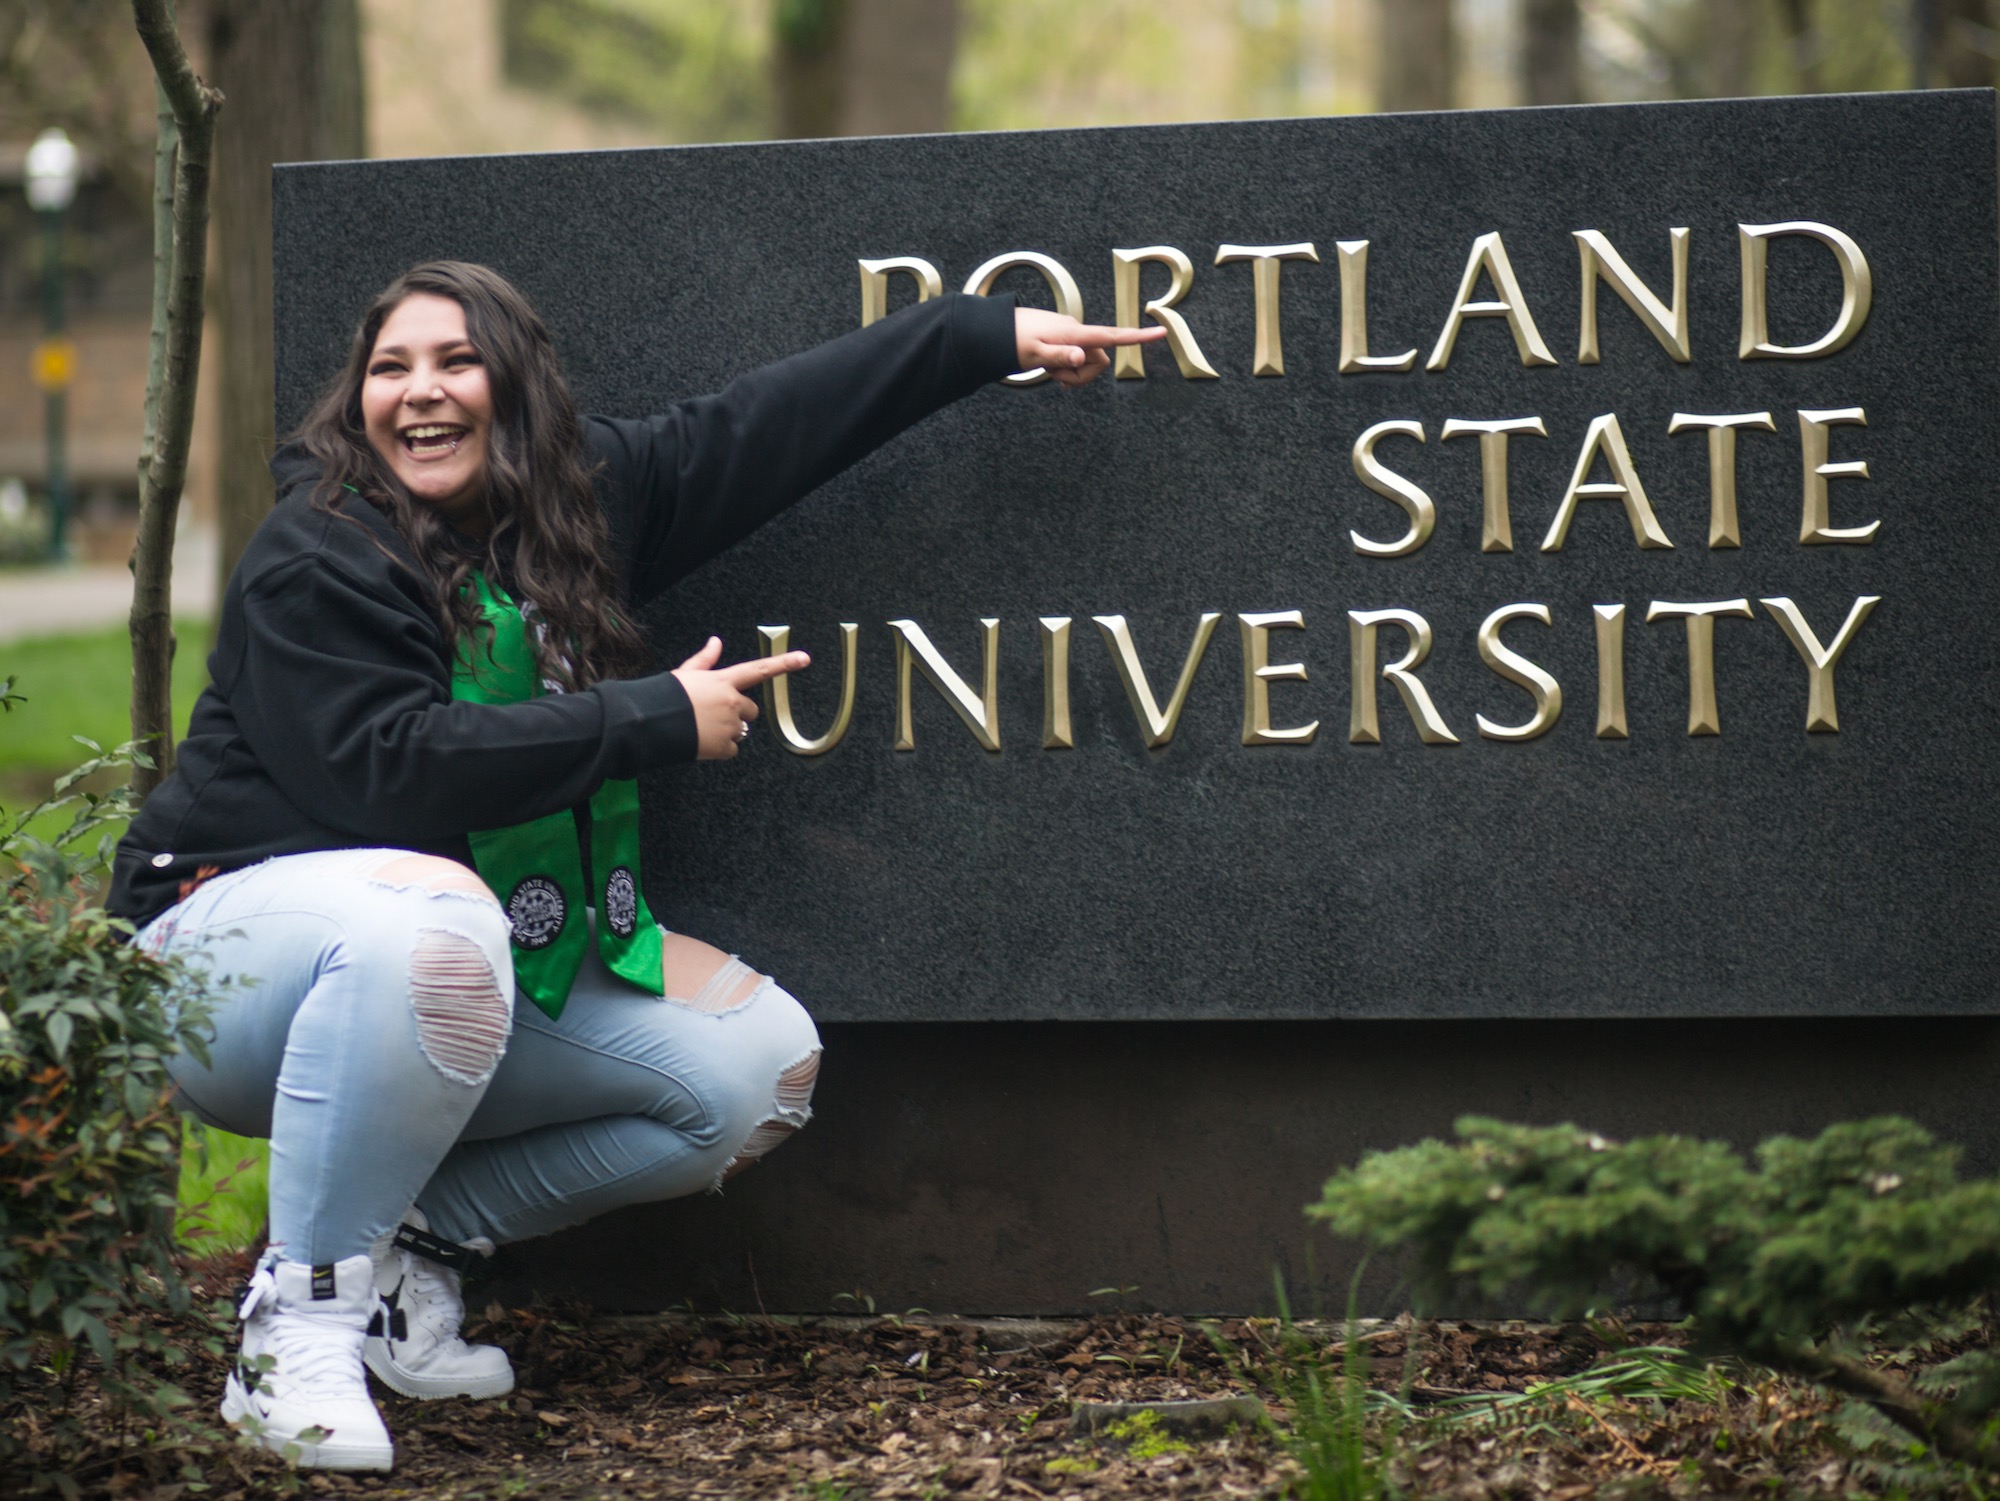 There is a person bent down pointing at the Portland State University sign.